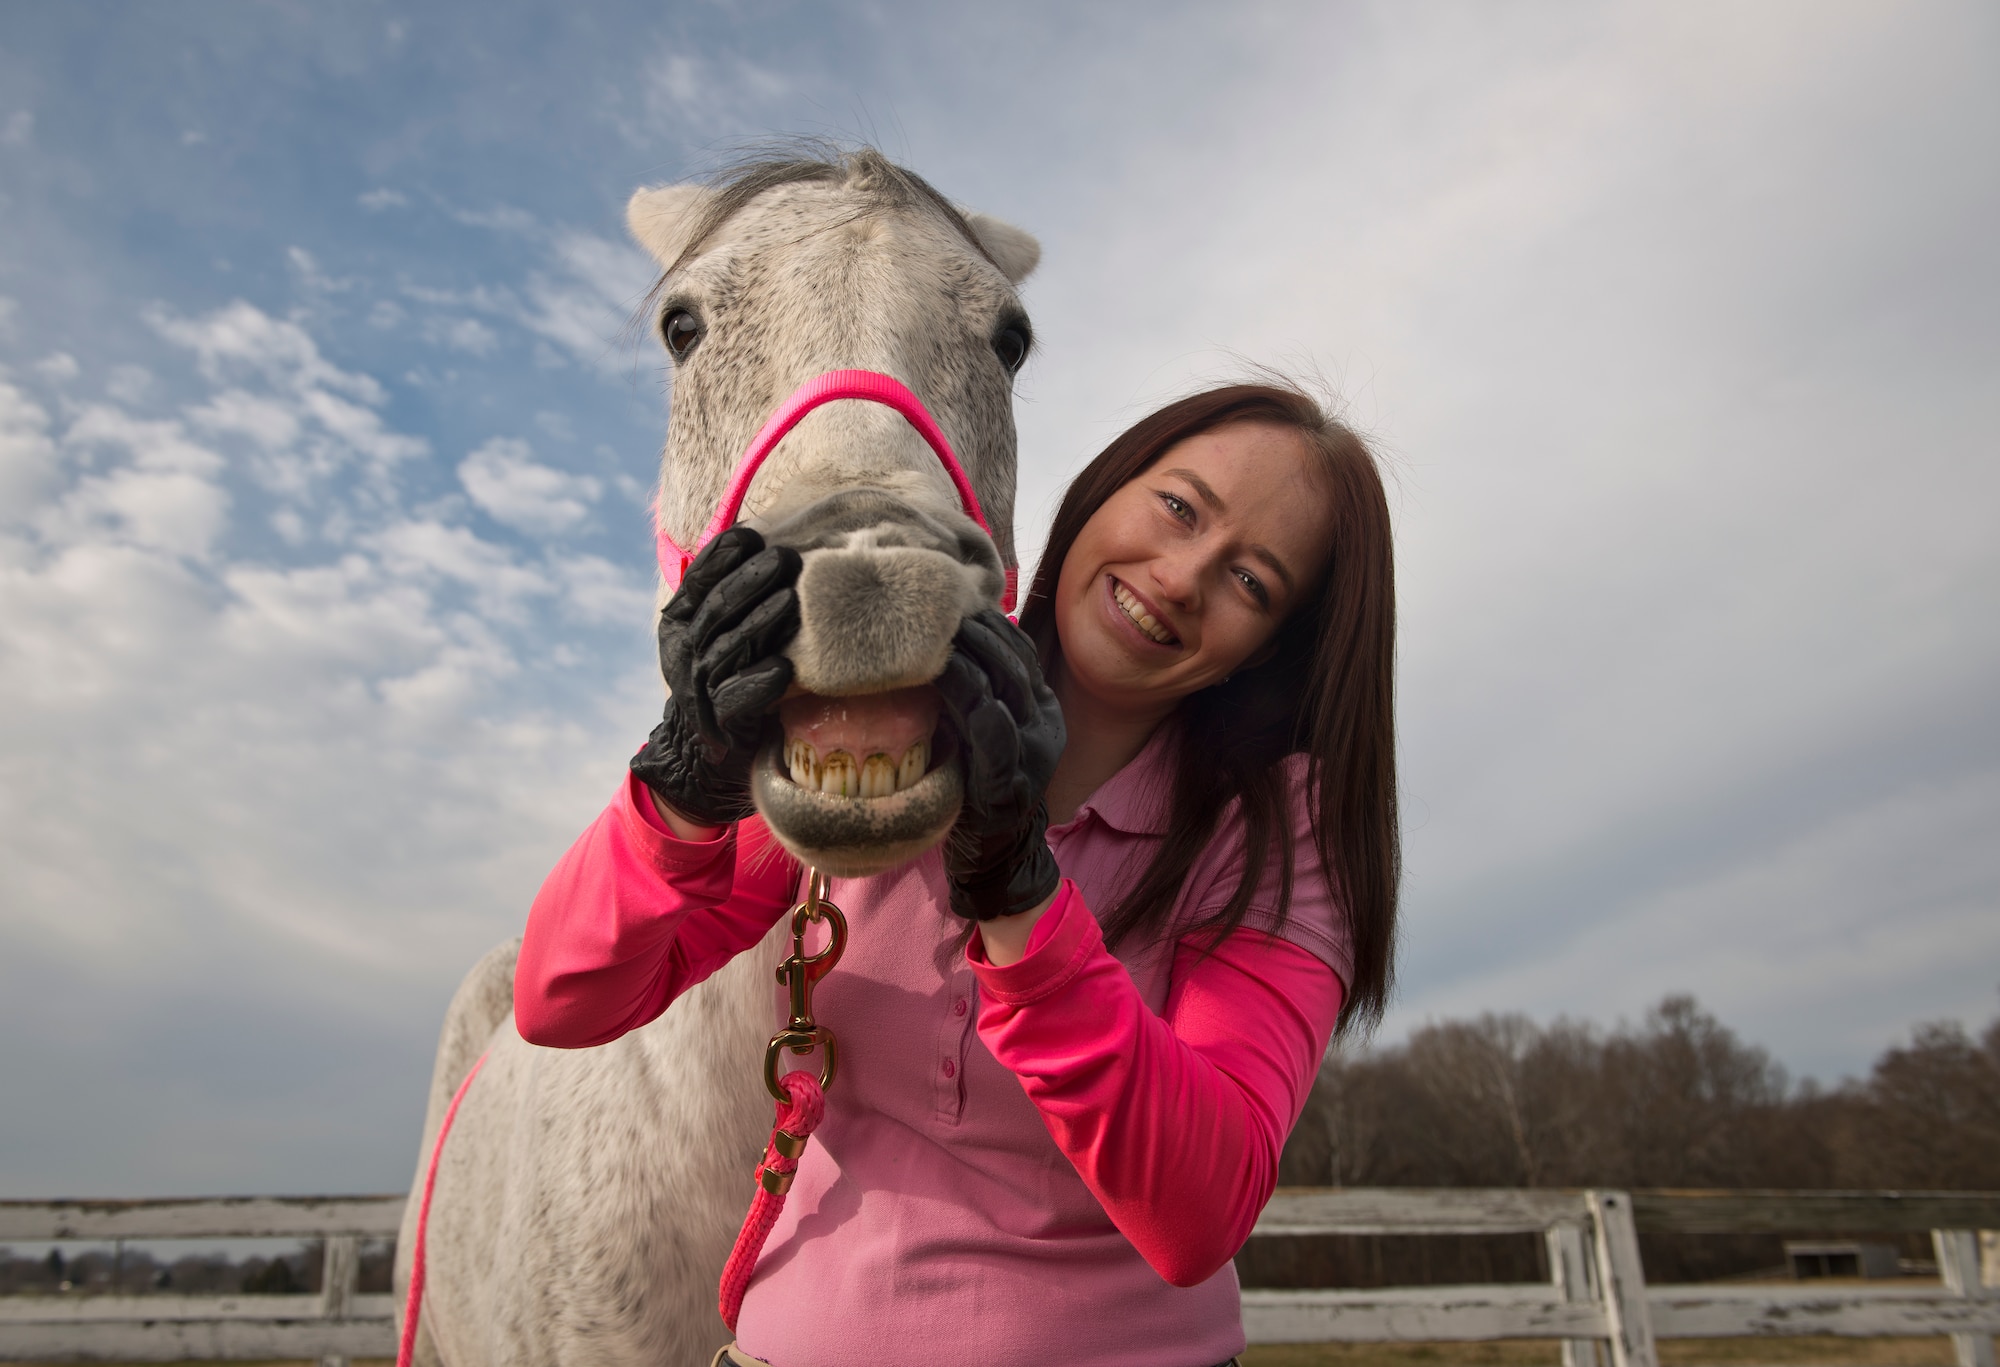 Airman 1st Class Kaitlyn Evans, an 11th Security Forces Squadron patrolman, poses for a portrait with her horse Kobalt in Lothian, Maryland after her military duty day is complete. Evans, a North Carolina native, relocated her horse to Maryland at her own expense to continue competing with the horse. Spending about two hours of time with her horse has helped Evans cope physically and mentally as she begins her military career. (U.S. Air Force photo/Staff Sgt. Vernon Young Jr.)